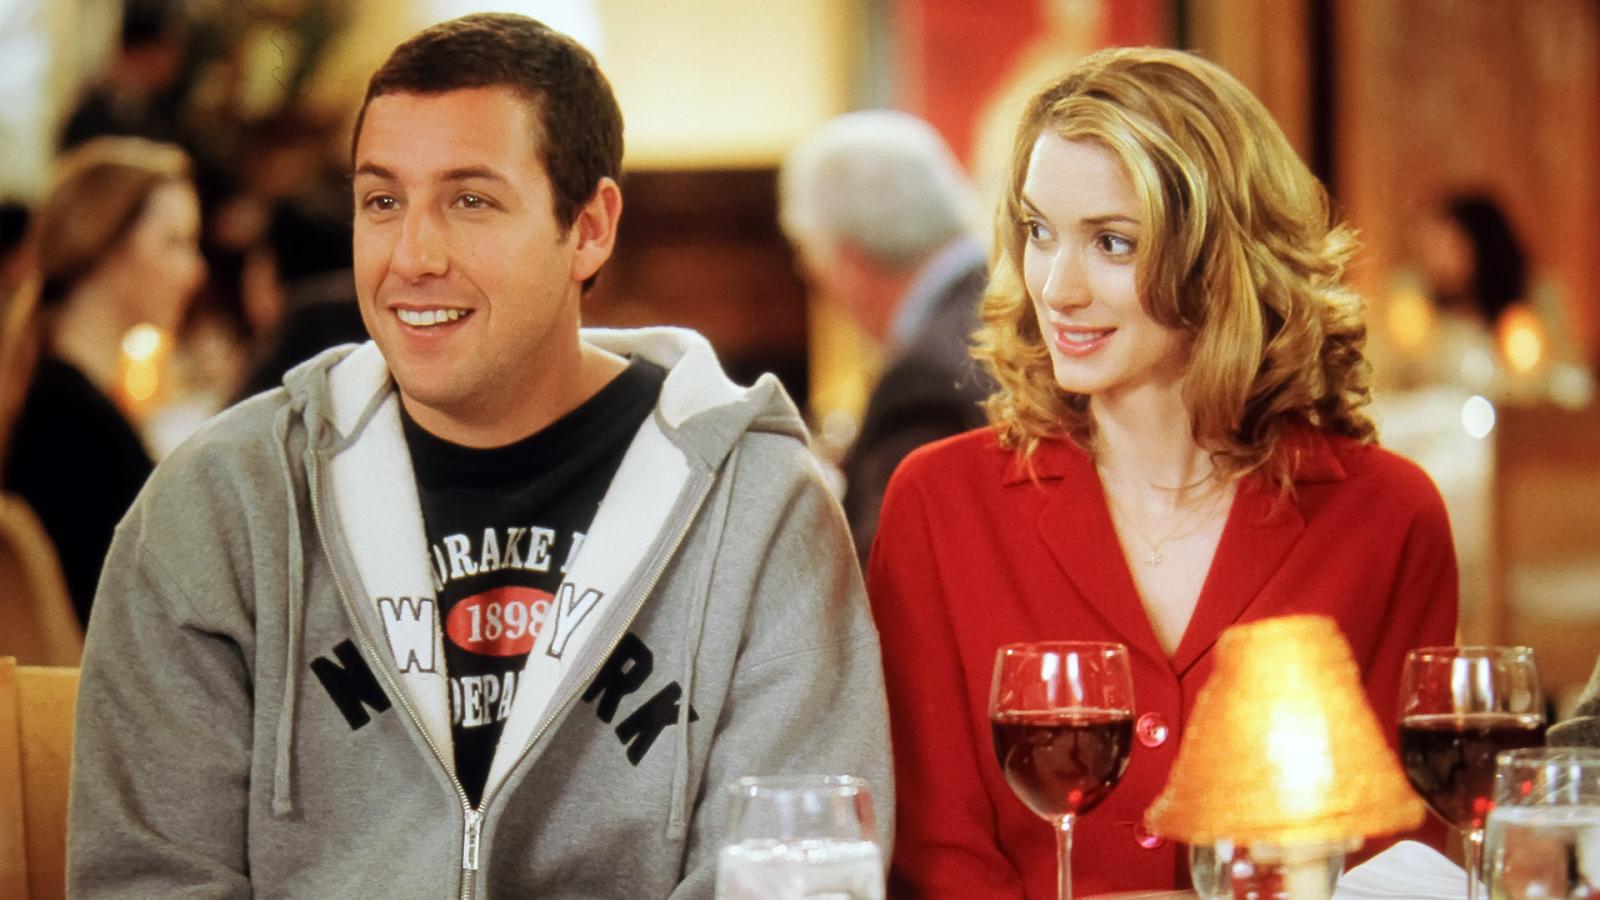 15 Best Movies With Adam Sandler to Watch With Family - image 8